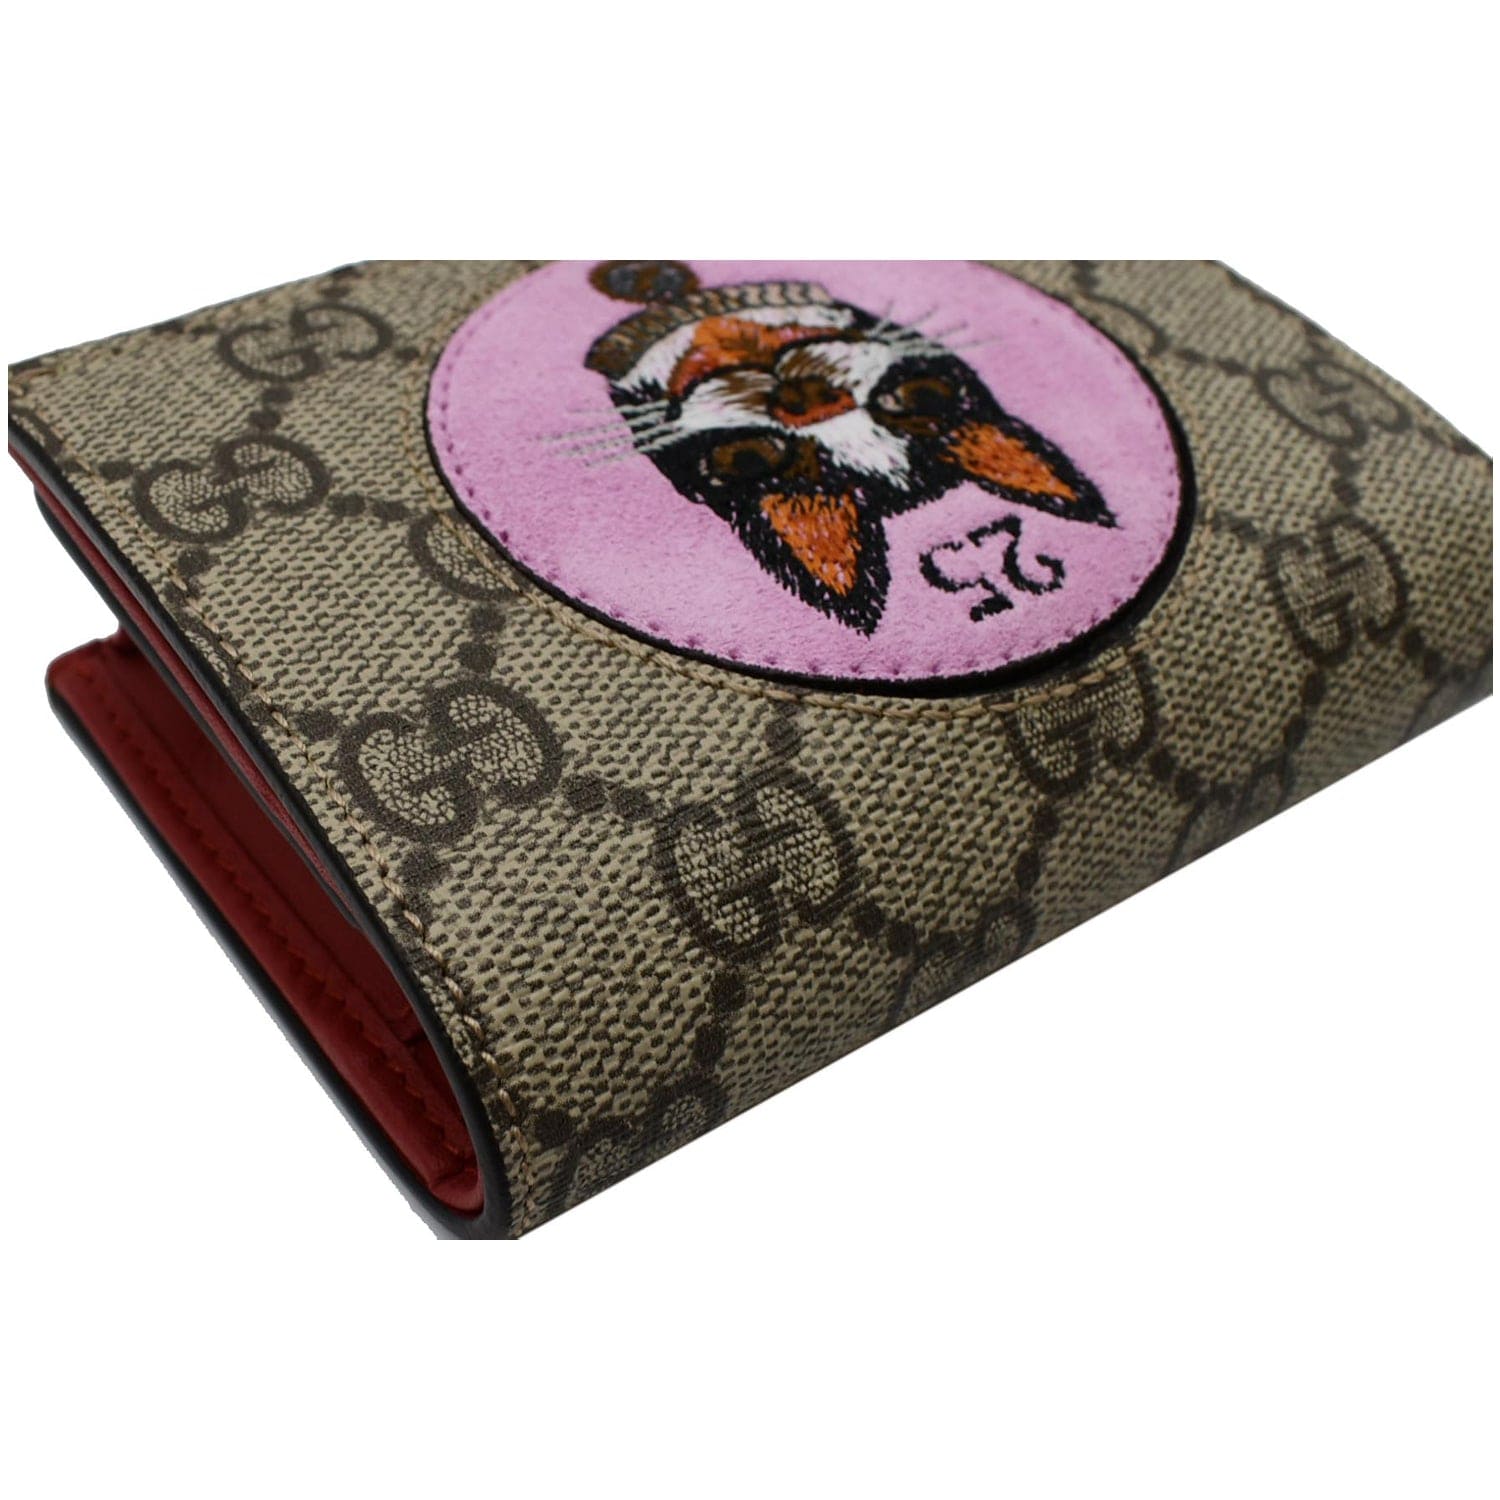 NIB Gucci GG Supreme Card Case Wallet with Bosco Patch Made in Italy 506277